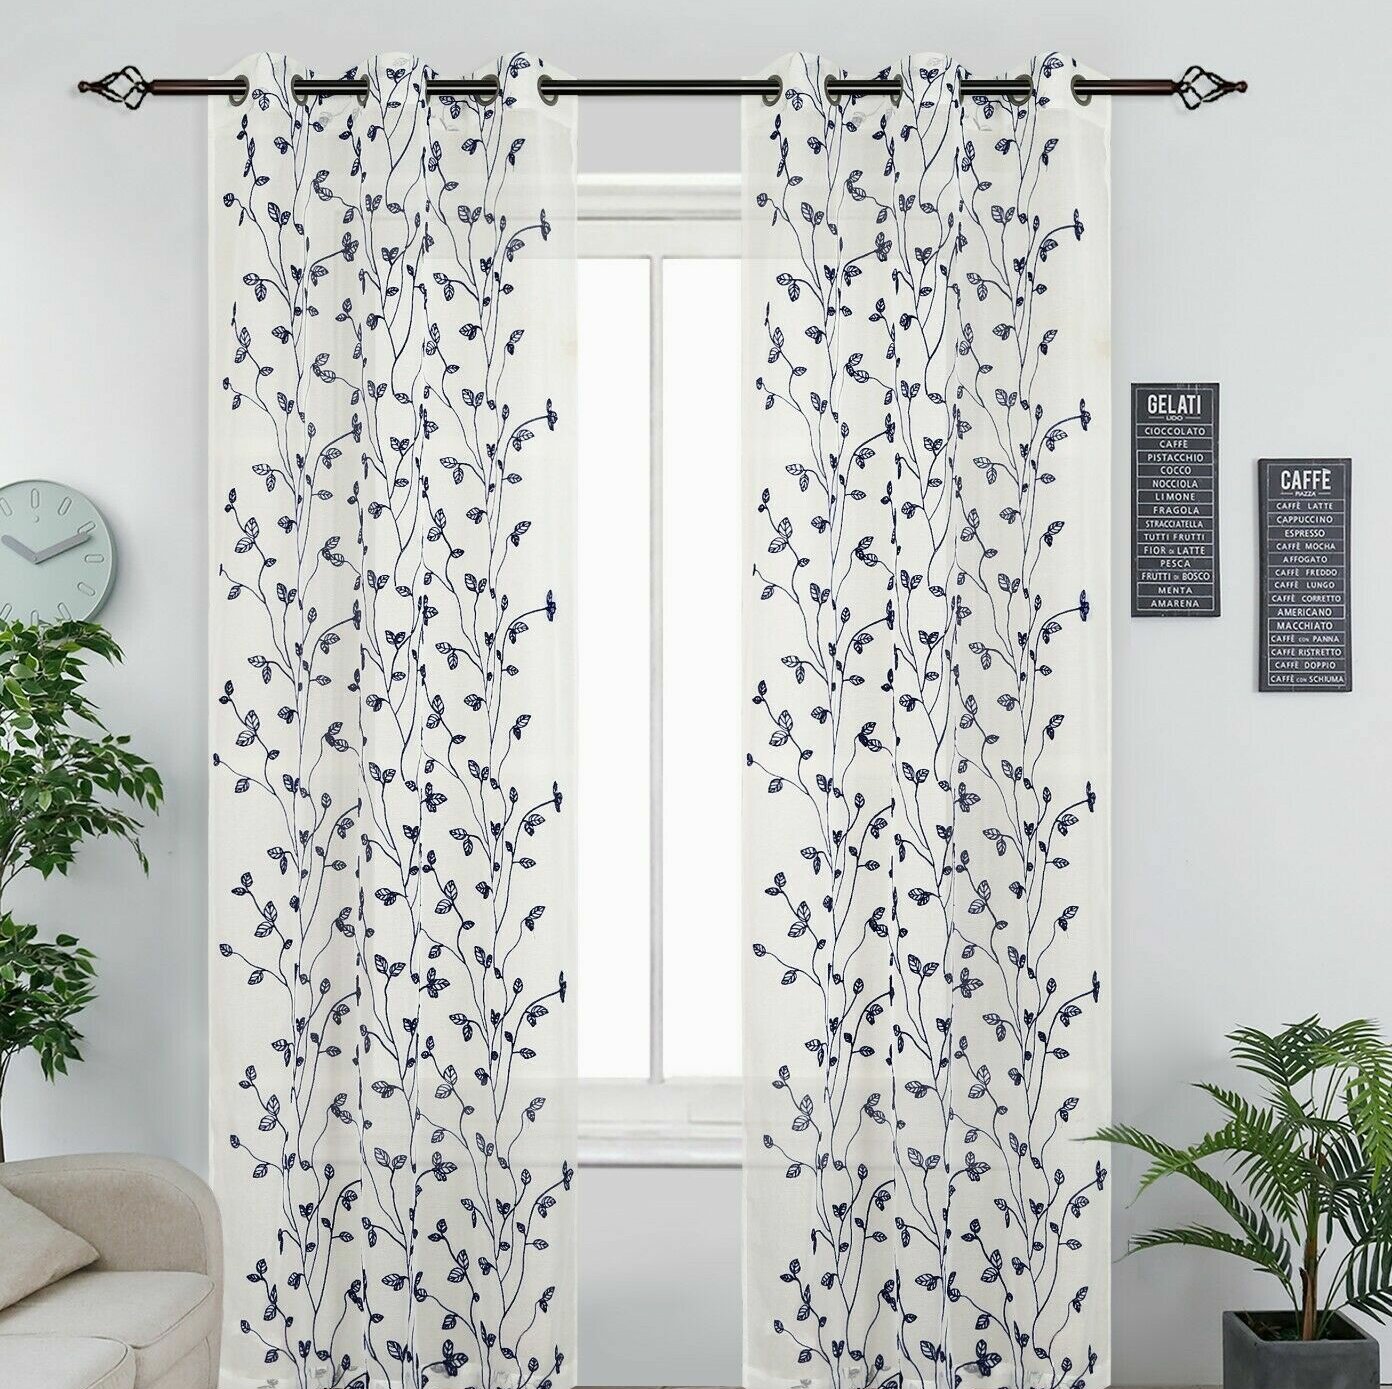 Embroidered Sheer Curtains Floral Pattern Drapes for Bedroom Grommet Top 2 Panel